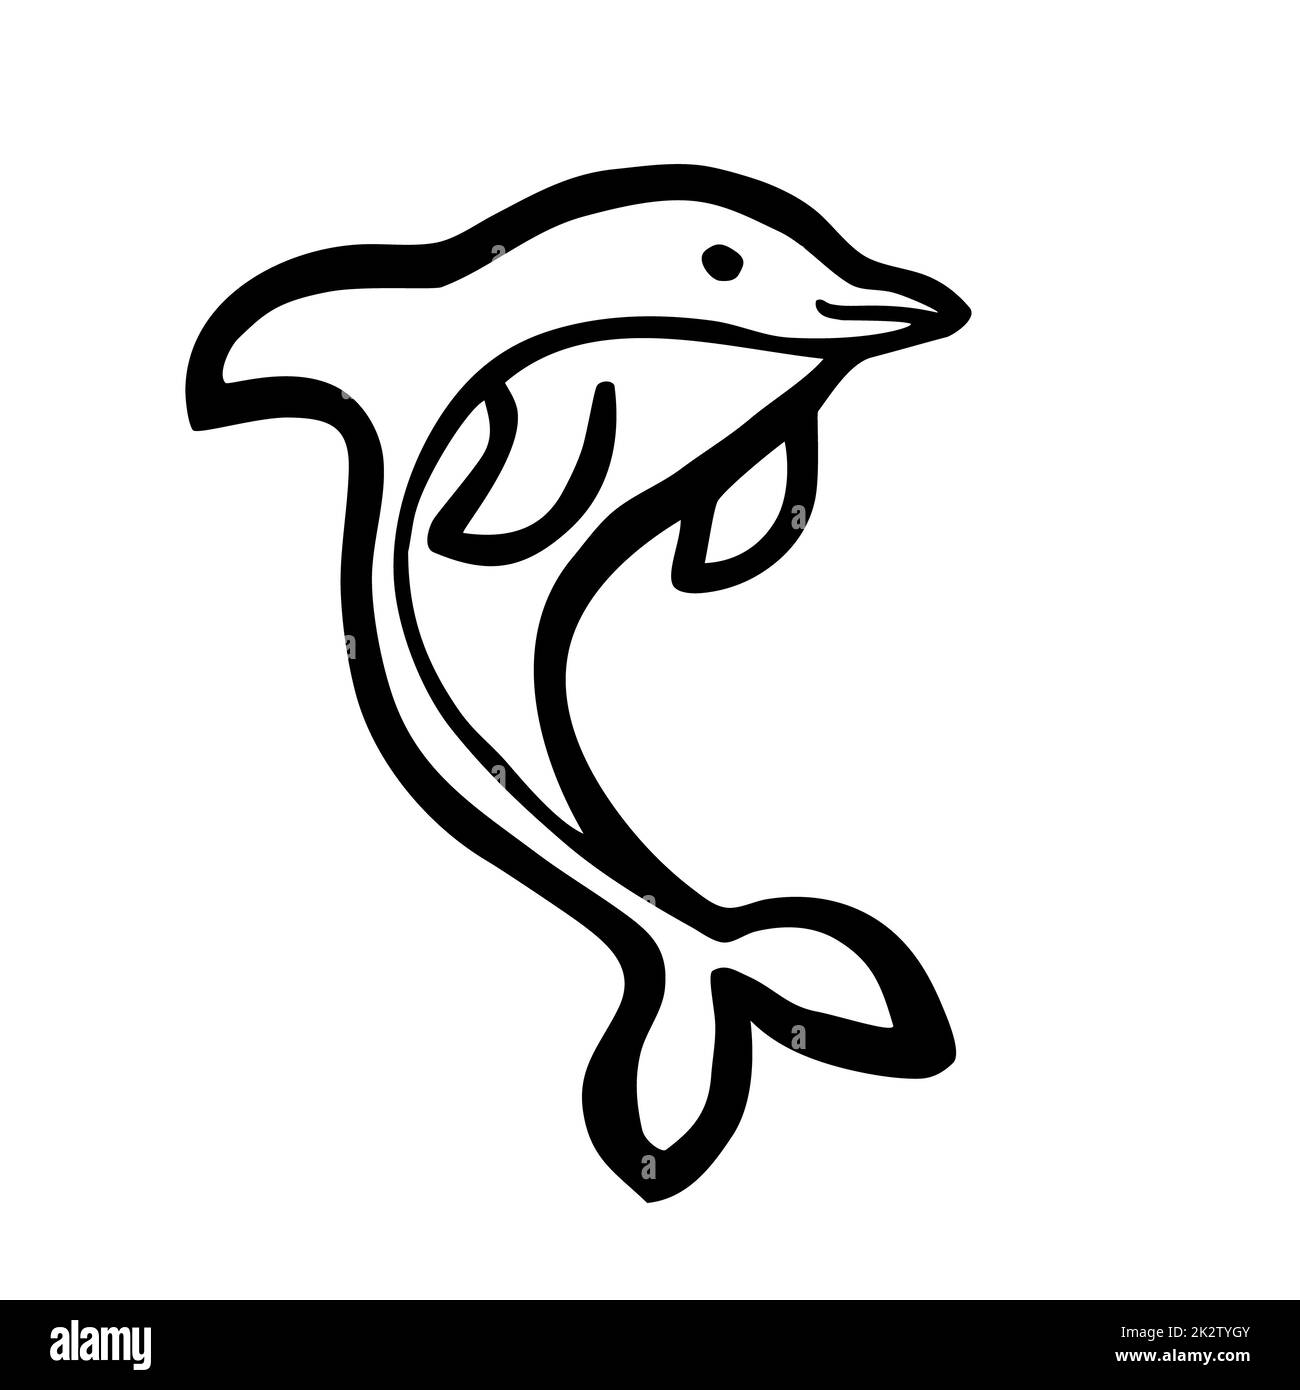 Cute cartoon dolphin hand painted with ink brush stroke Stock Photo